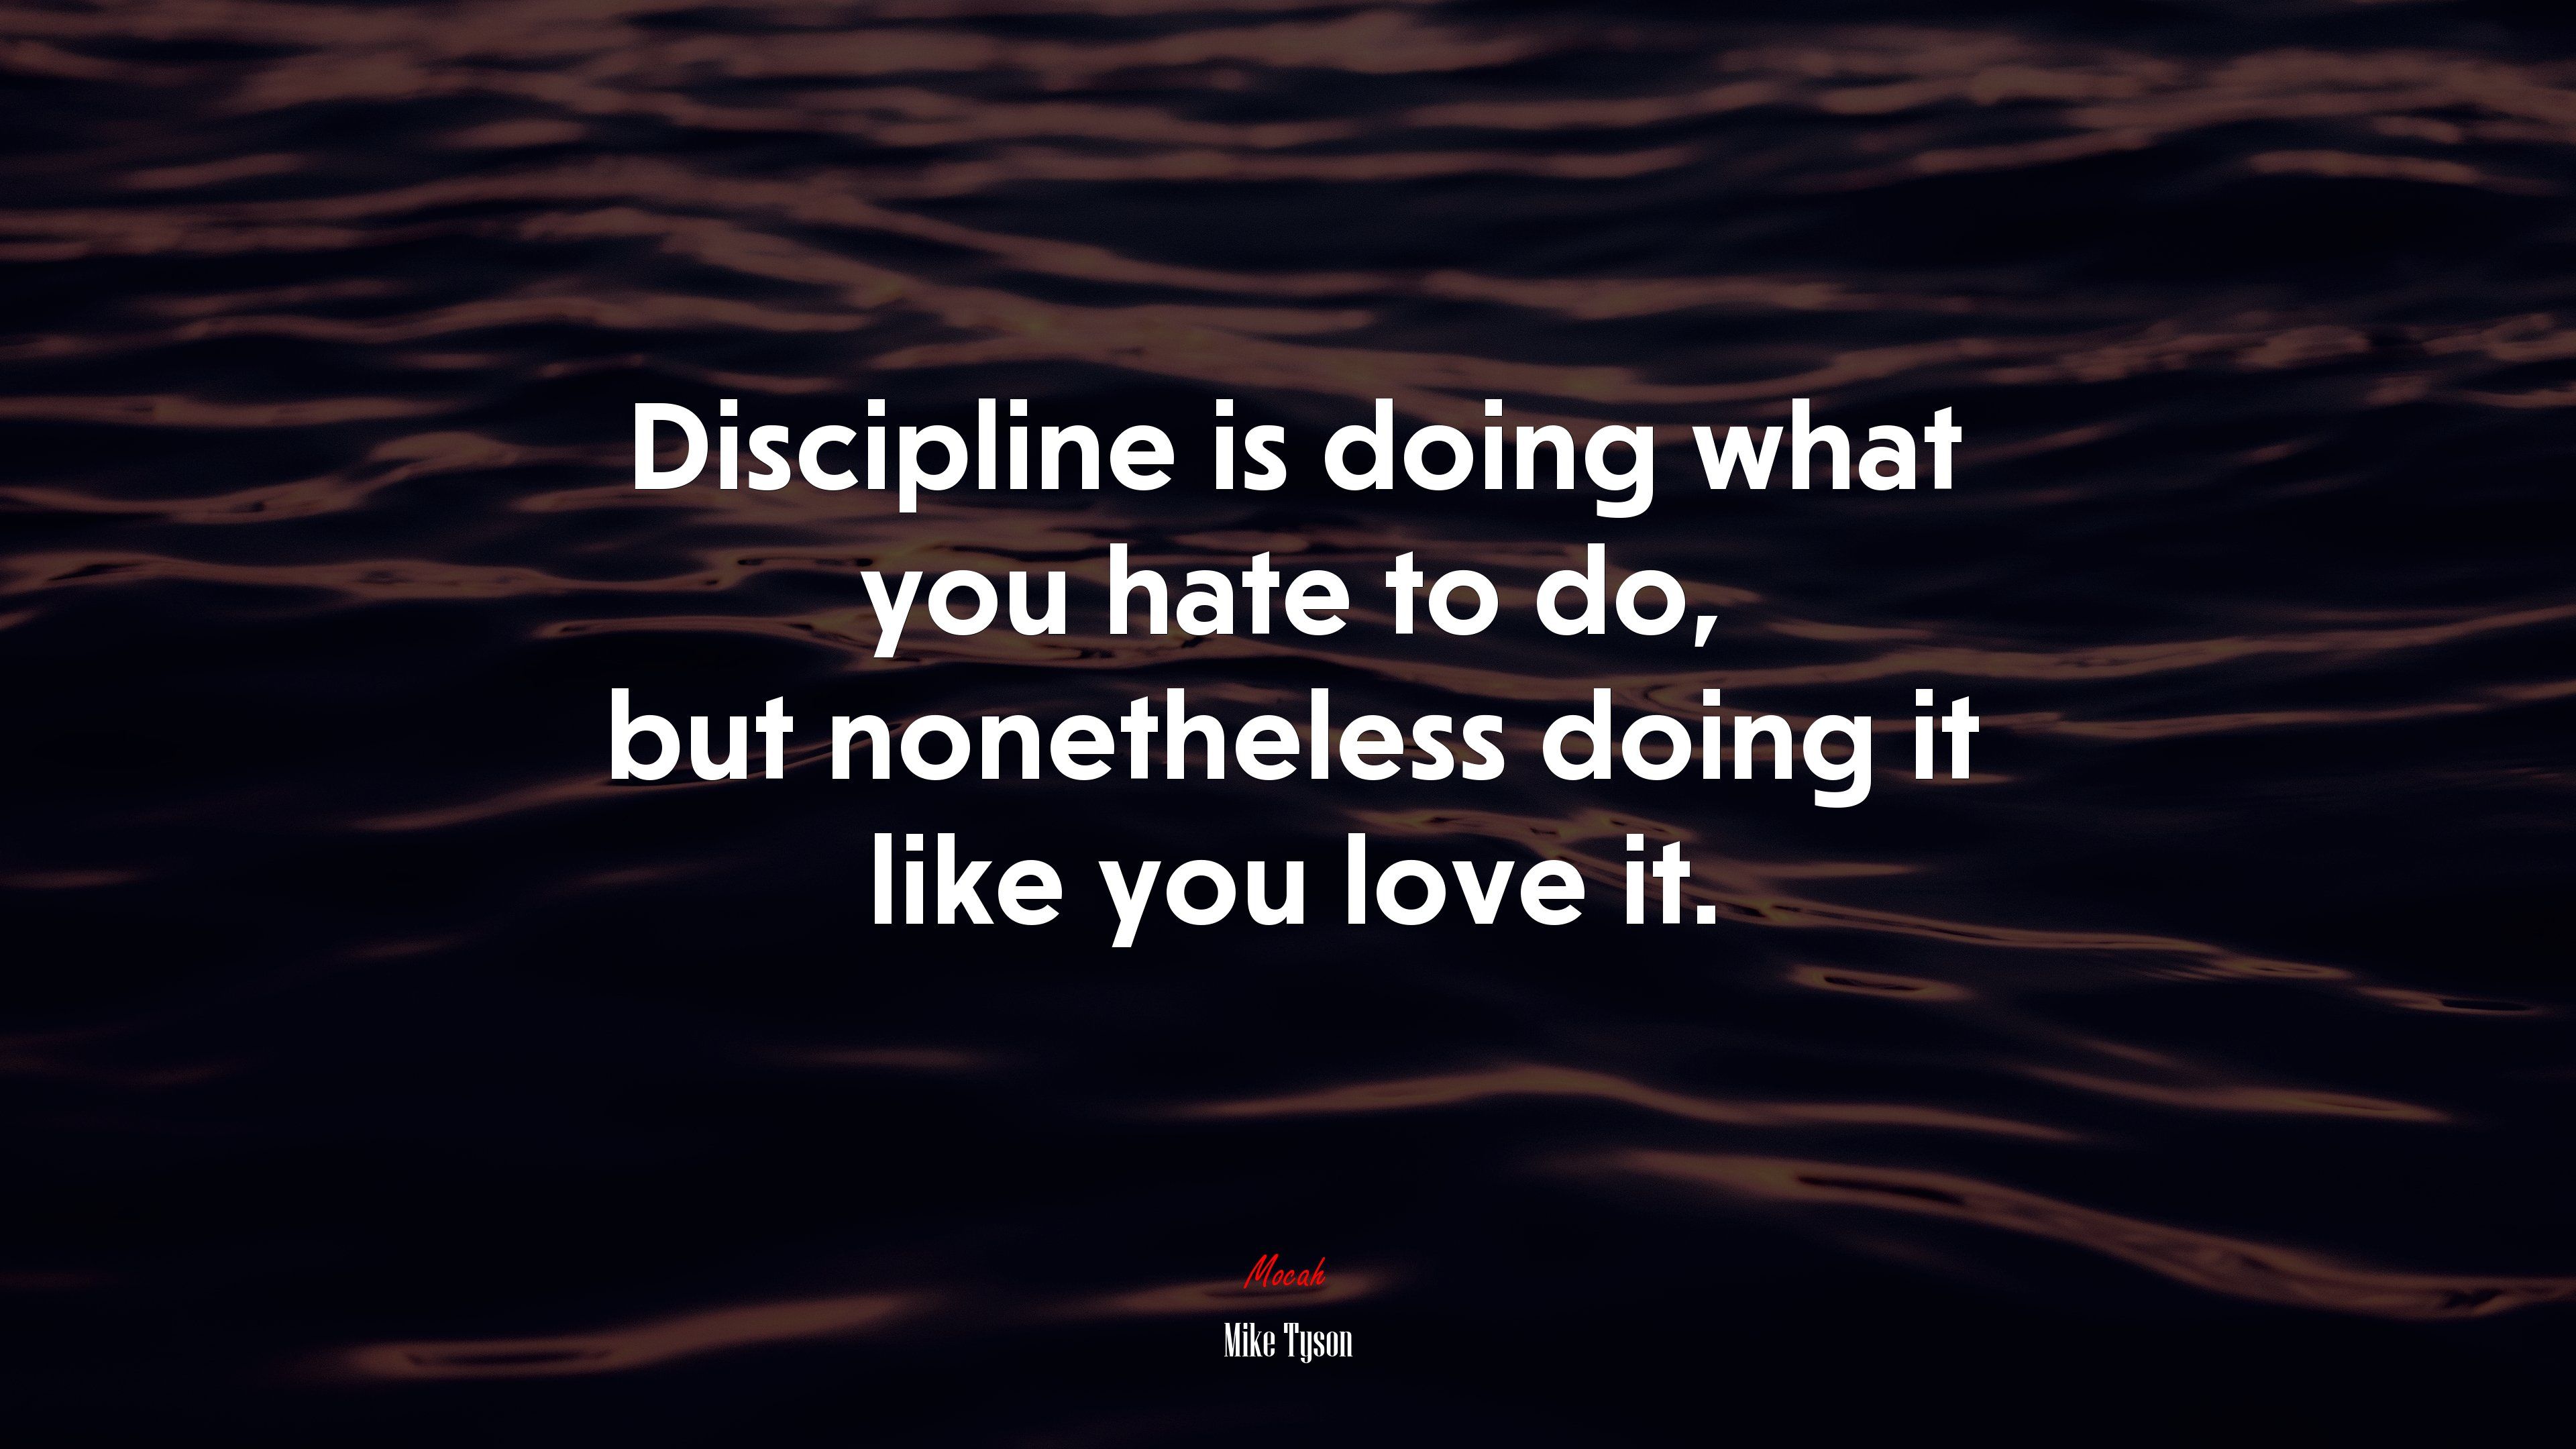 Discipline is doing what you hate to do, but nonetheless doing it like you love it. Mike Tyson quote, 4k wallpaper. Mocah HD Wallpaper